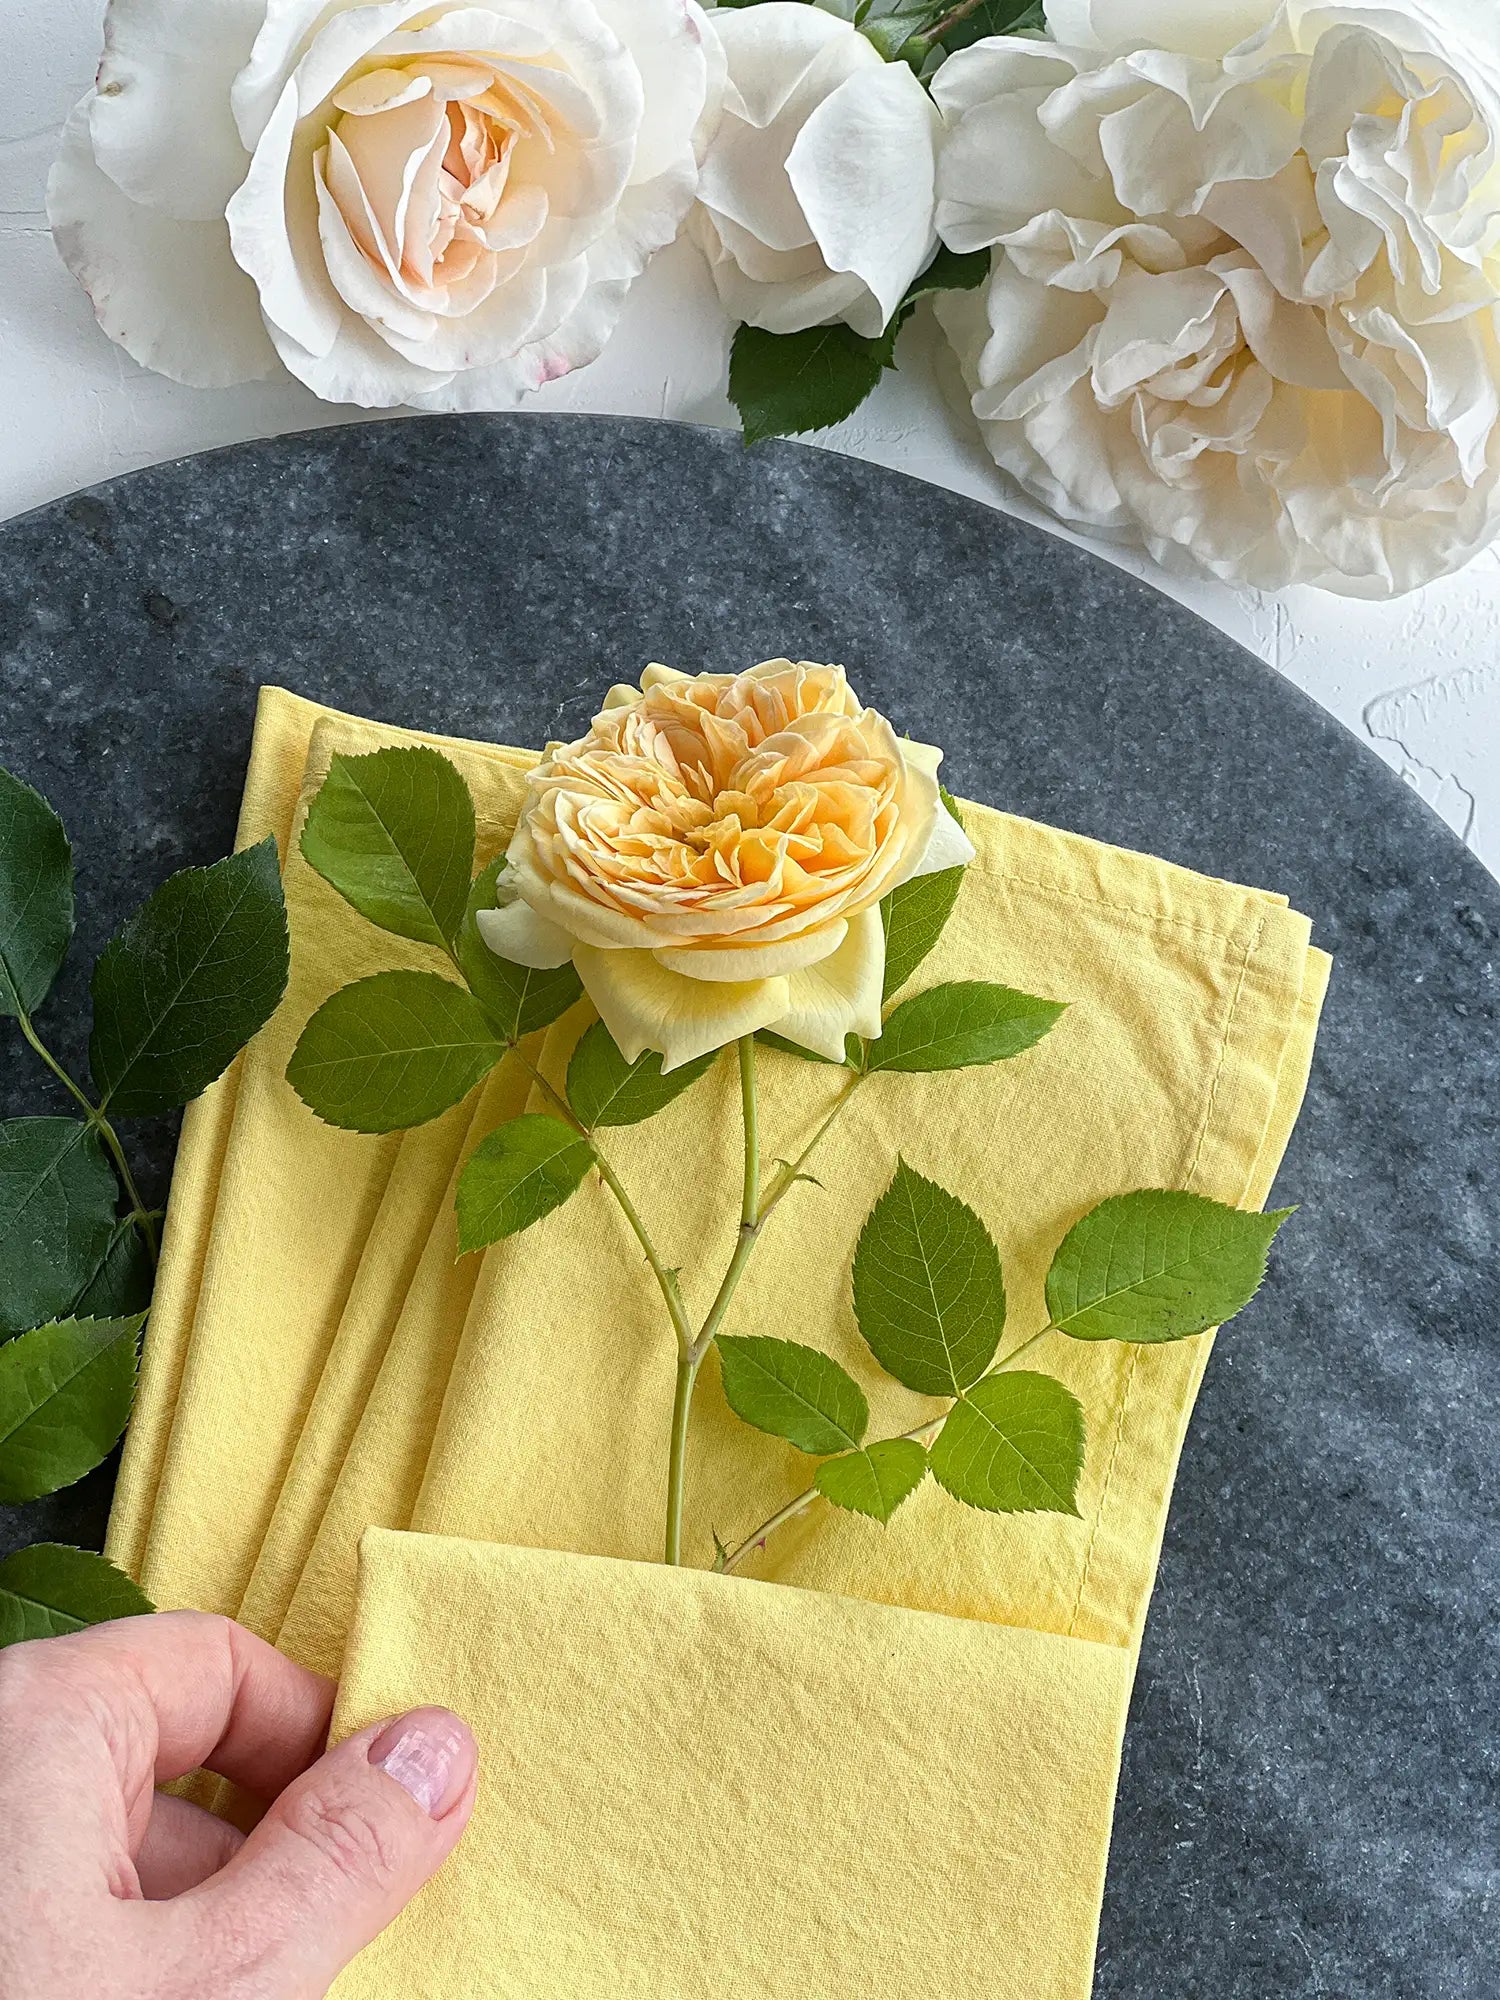 Serving table with yellow napkins